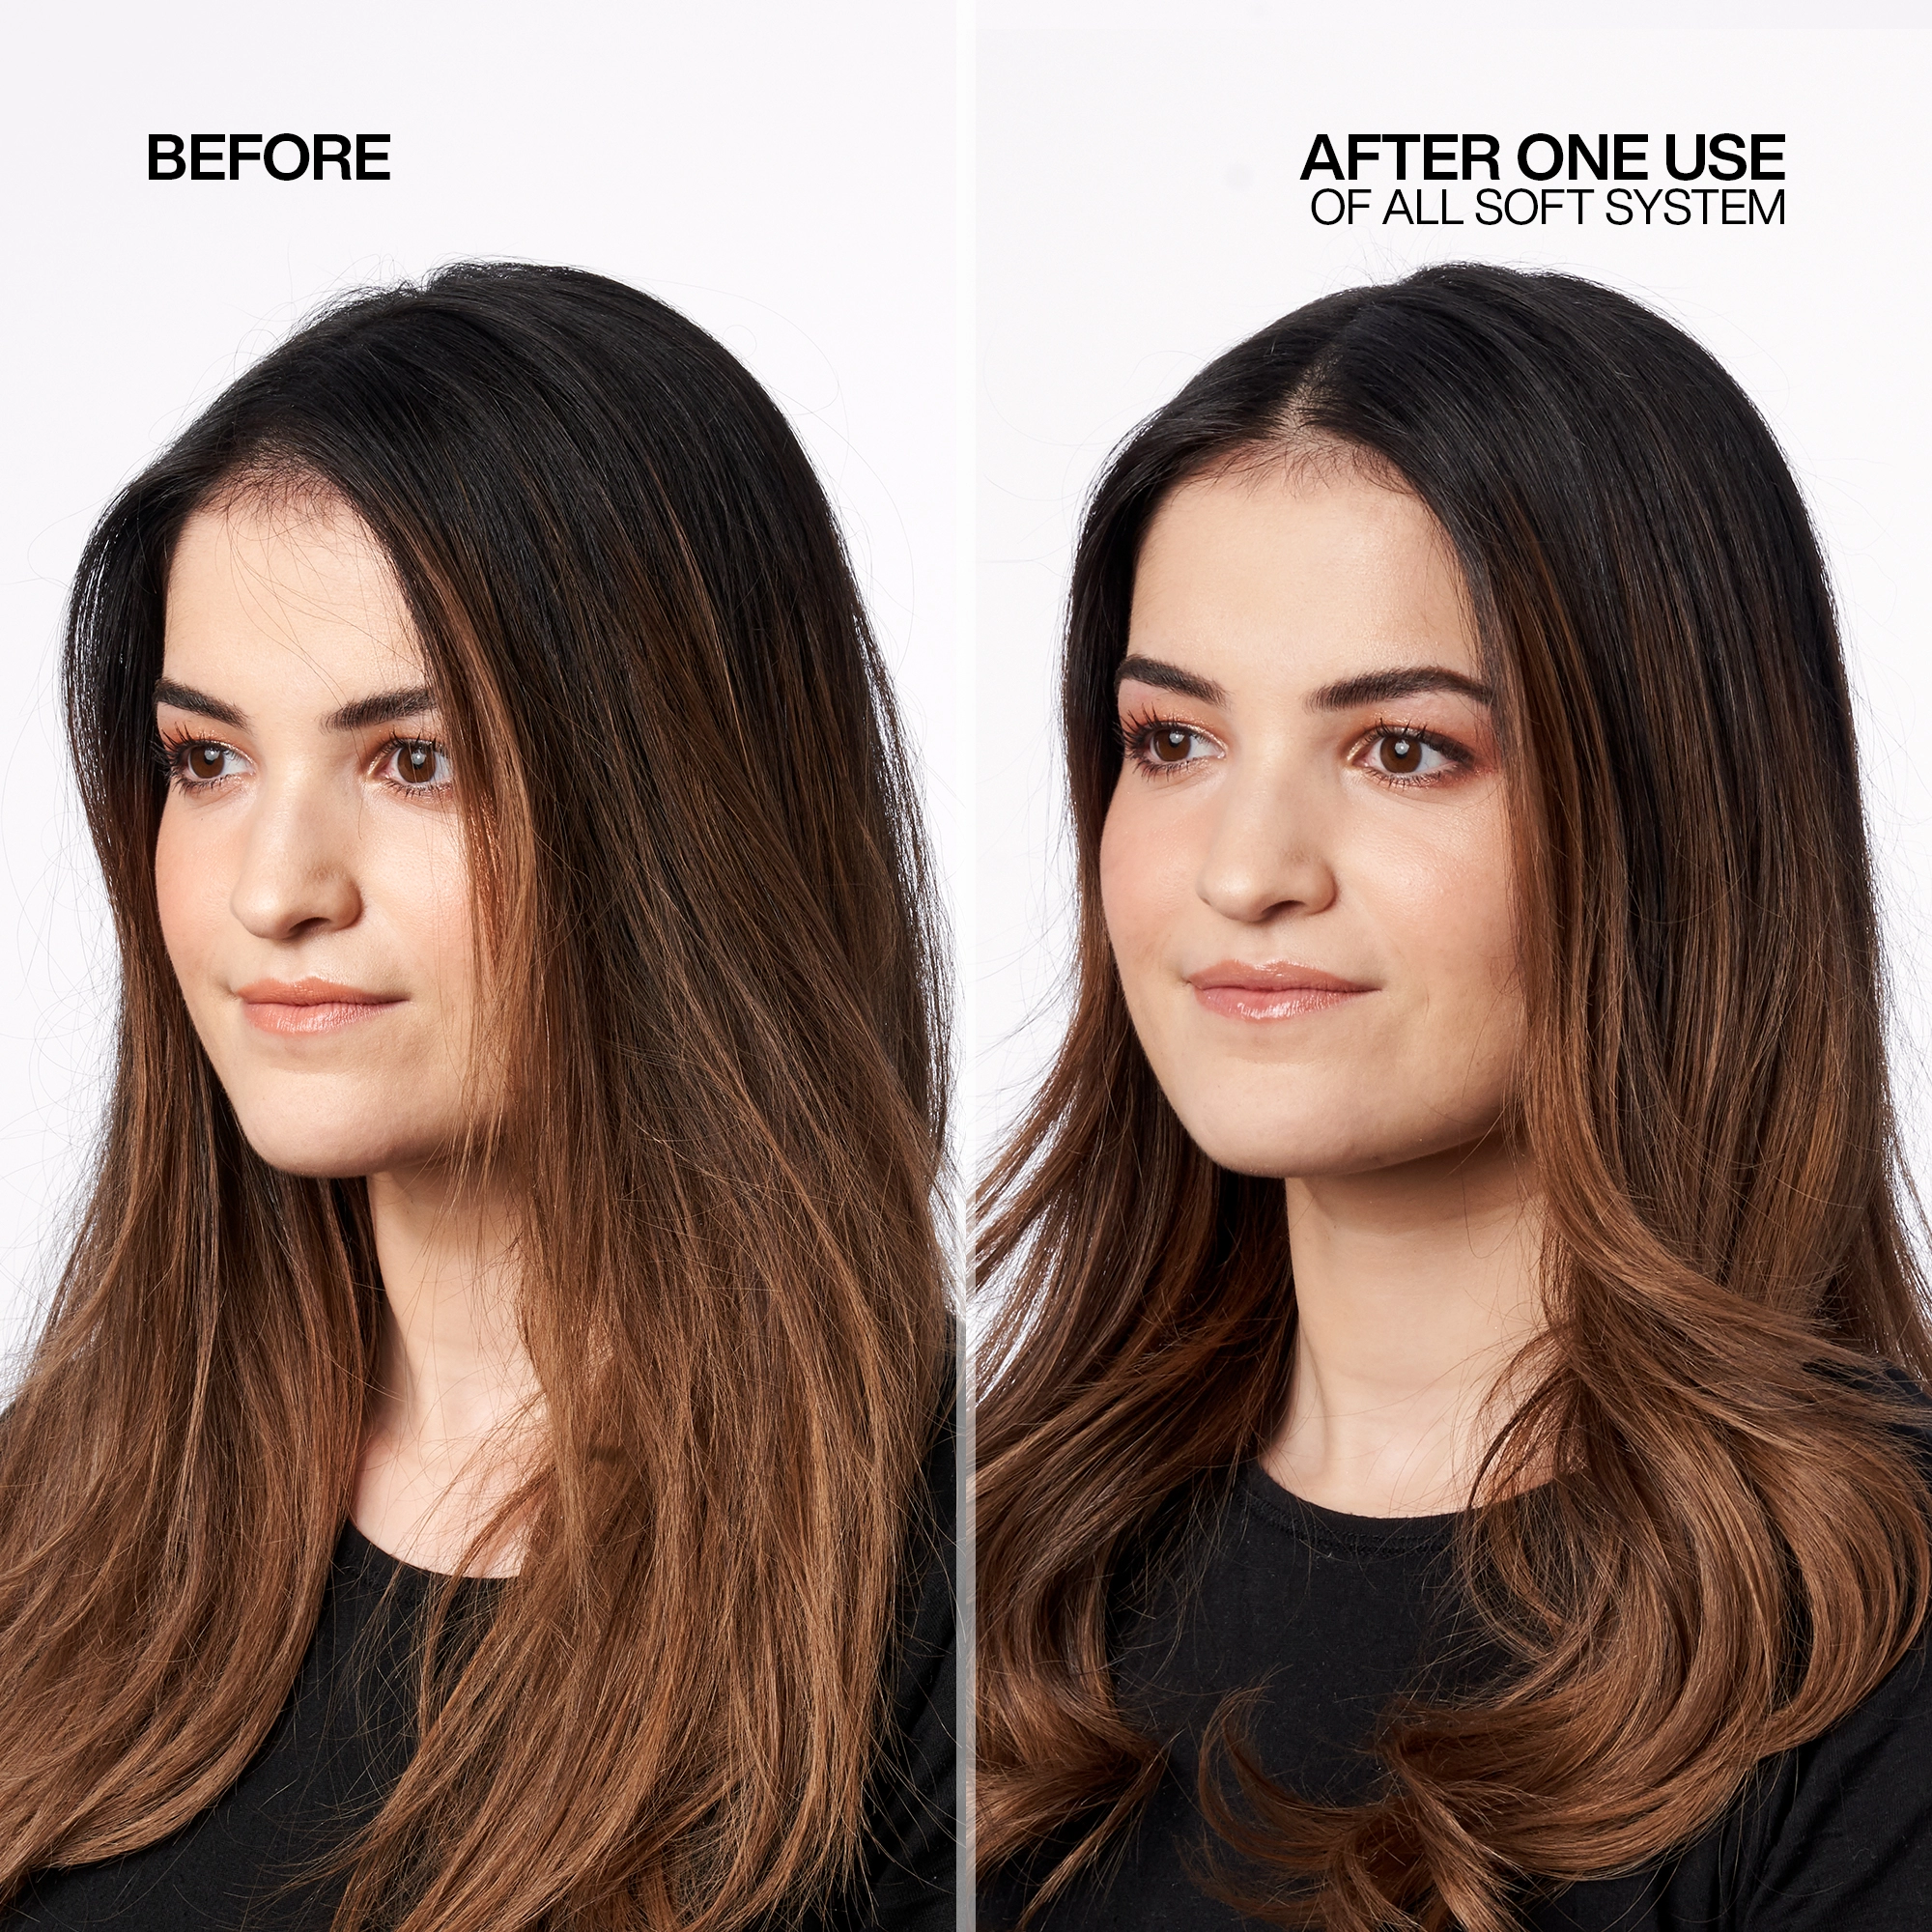 Redken-2020-All-Soft-System-EComm-Before-After-2000×2000